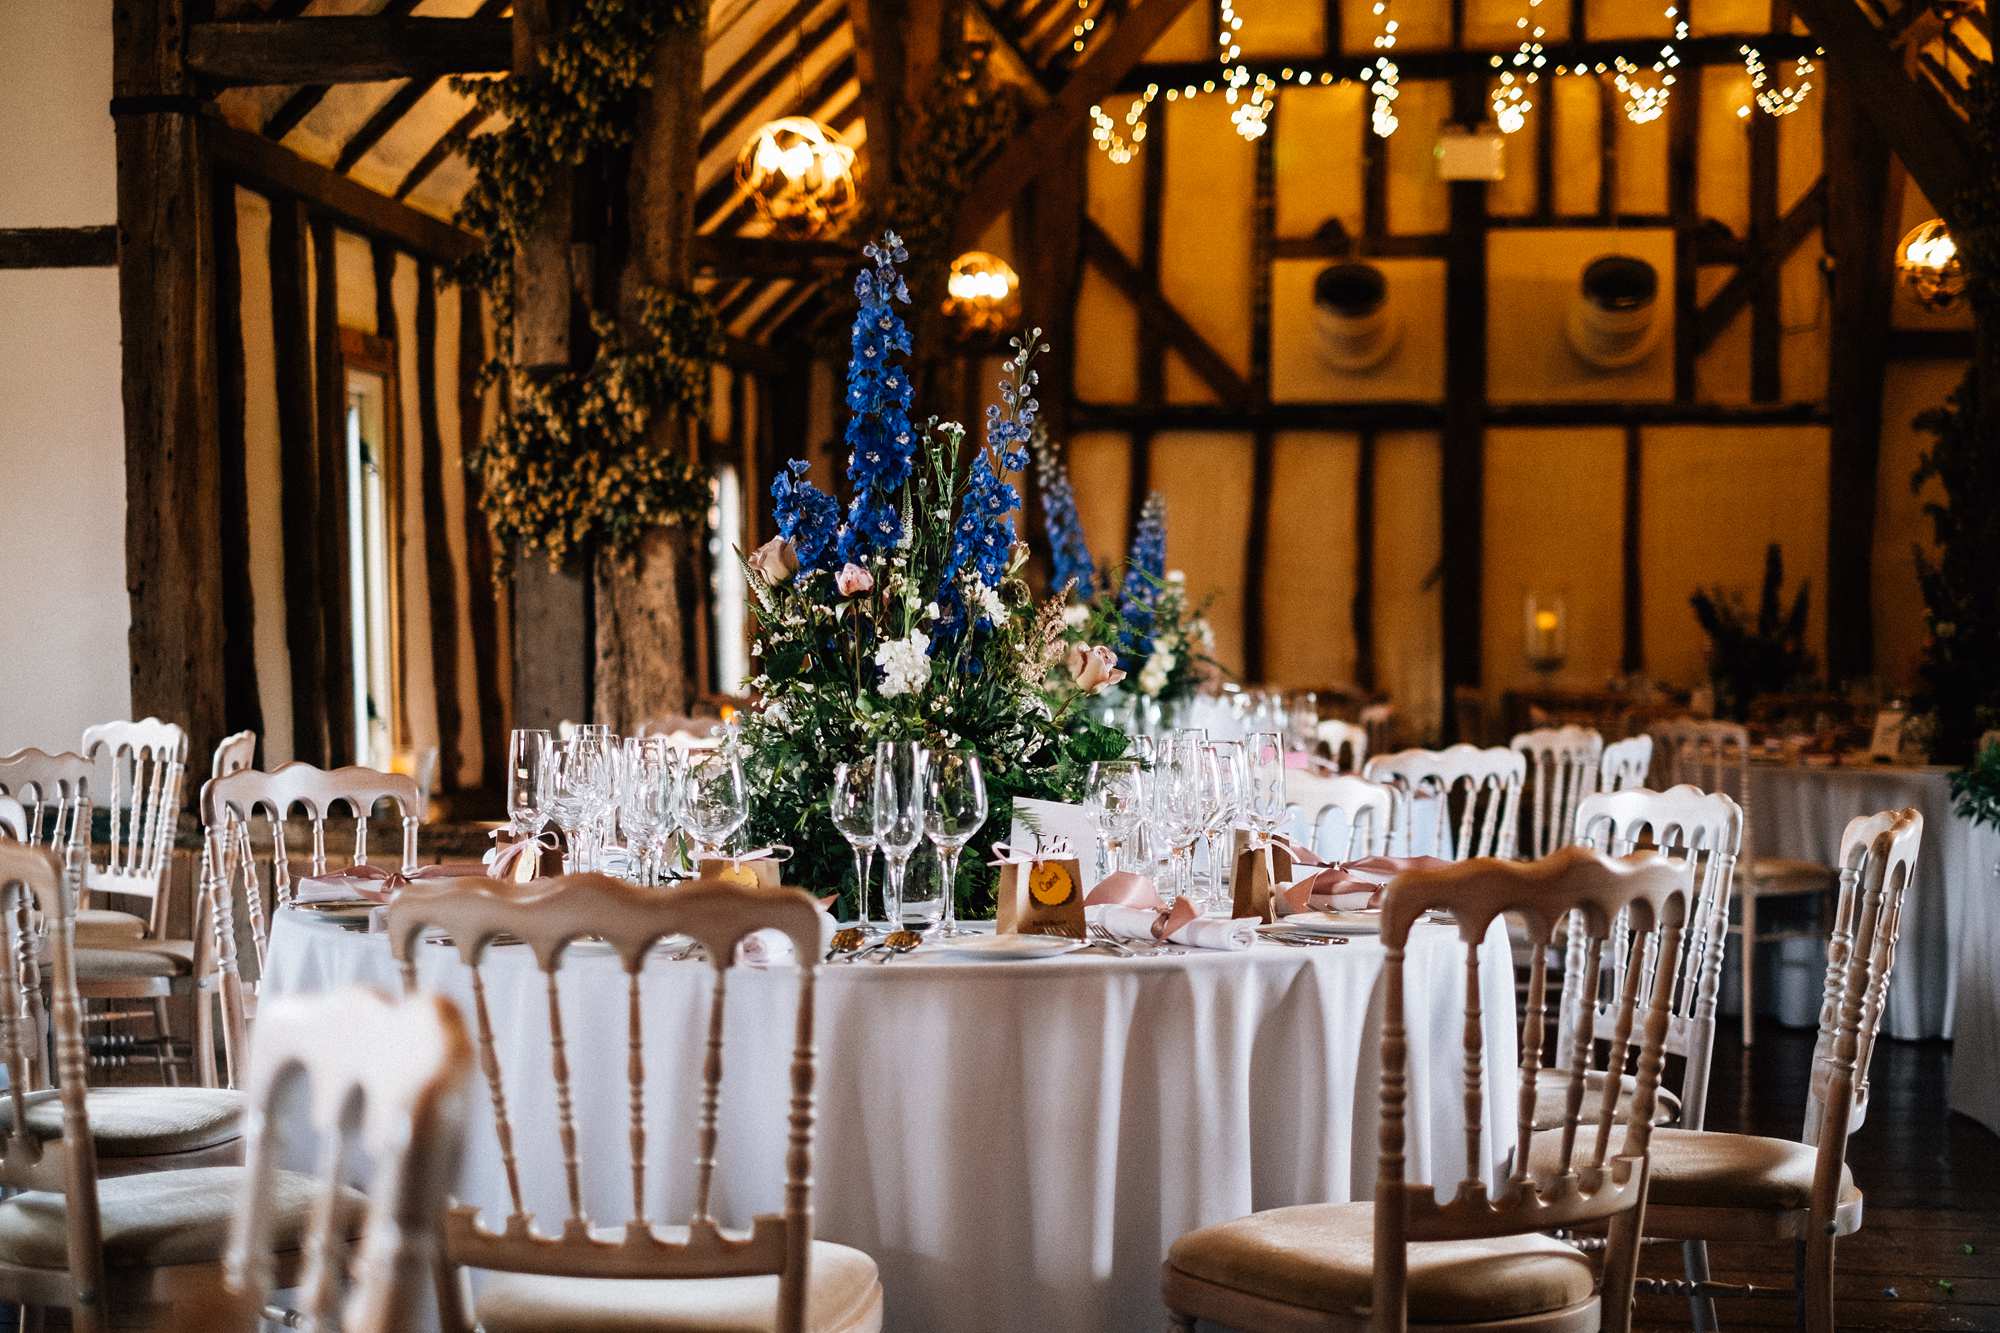 Gorgeous June wedding at Winters Barns